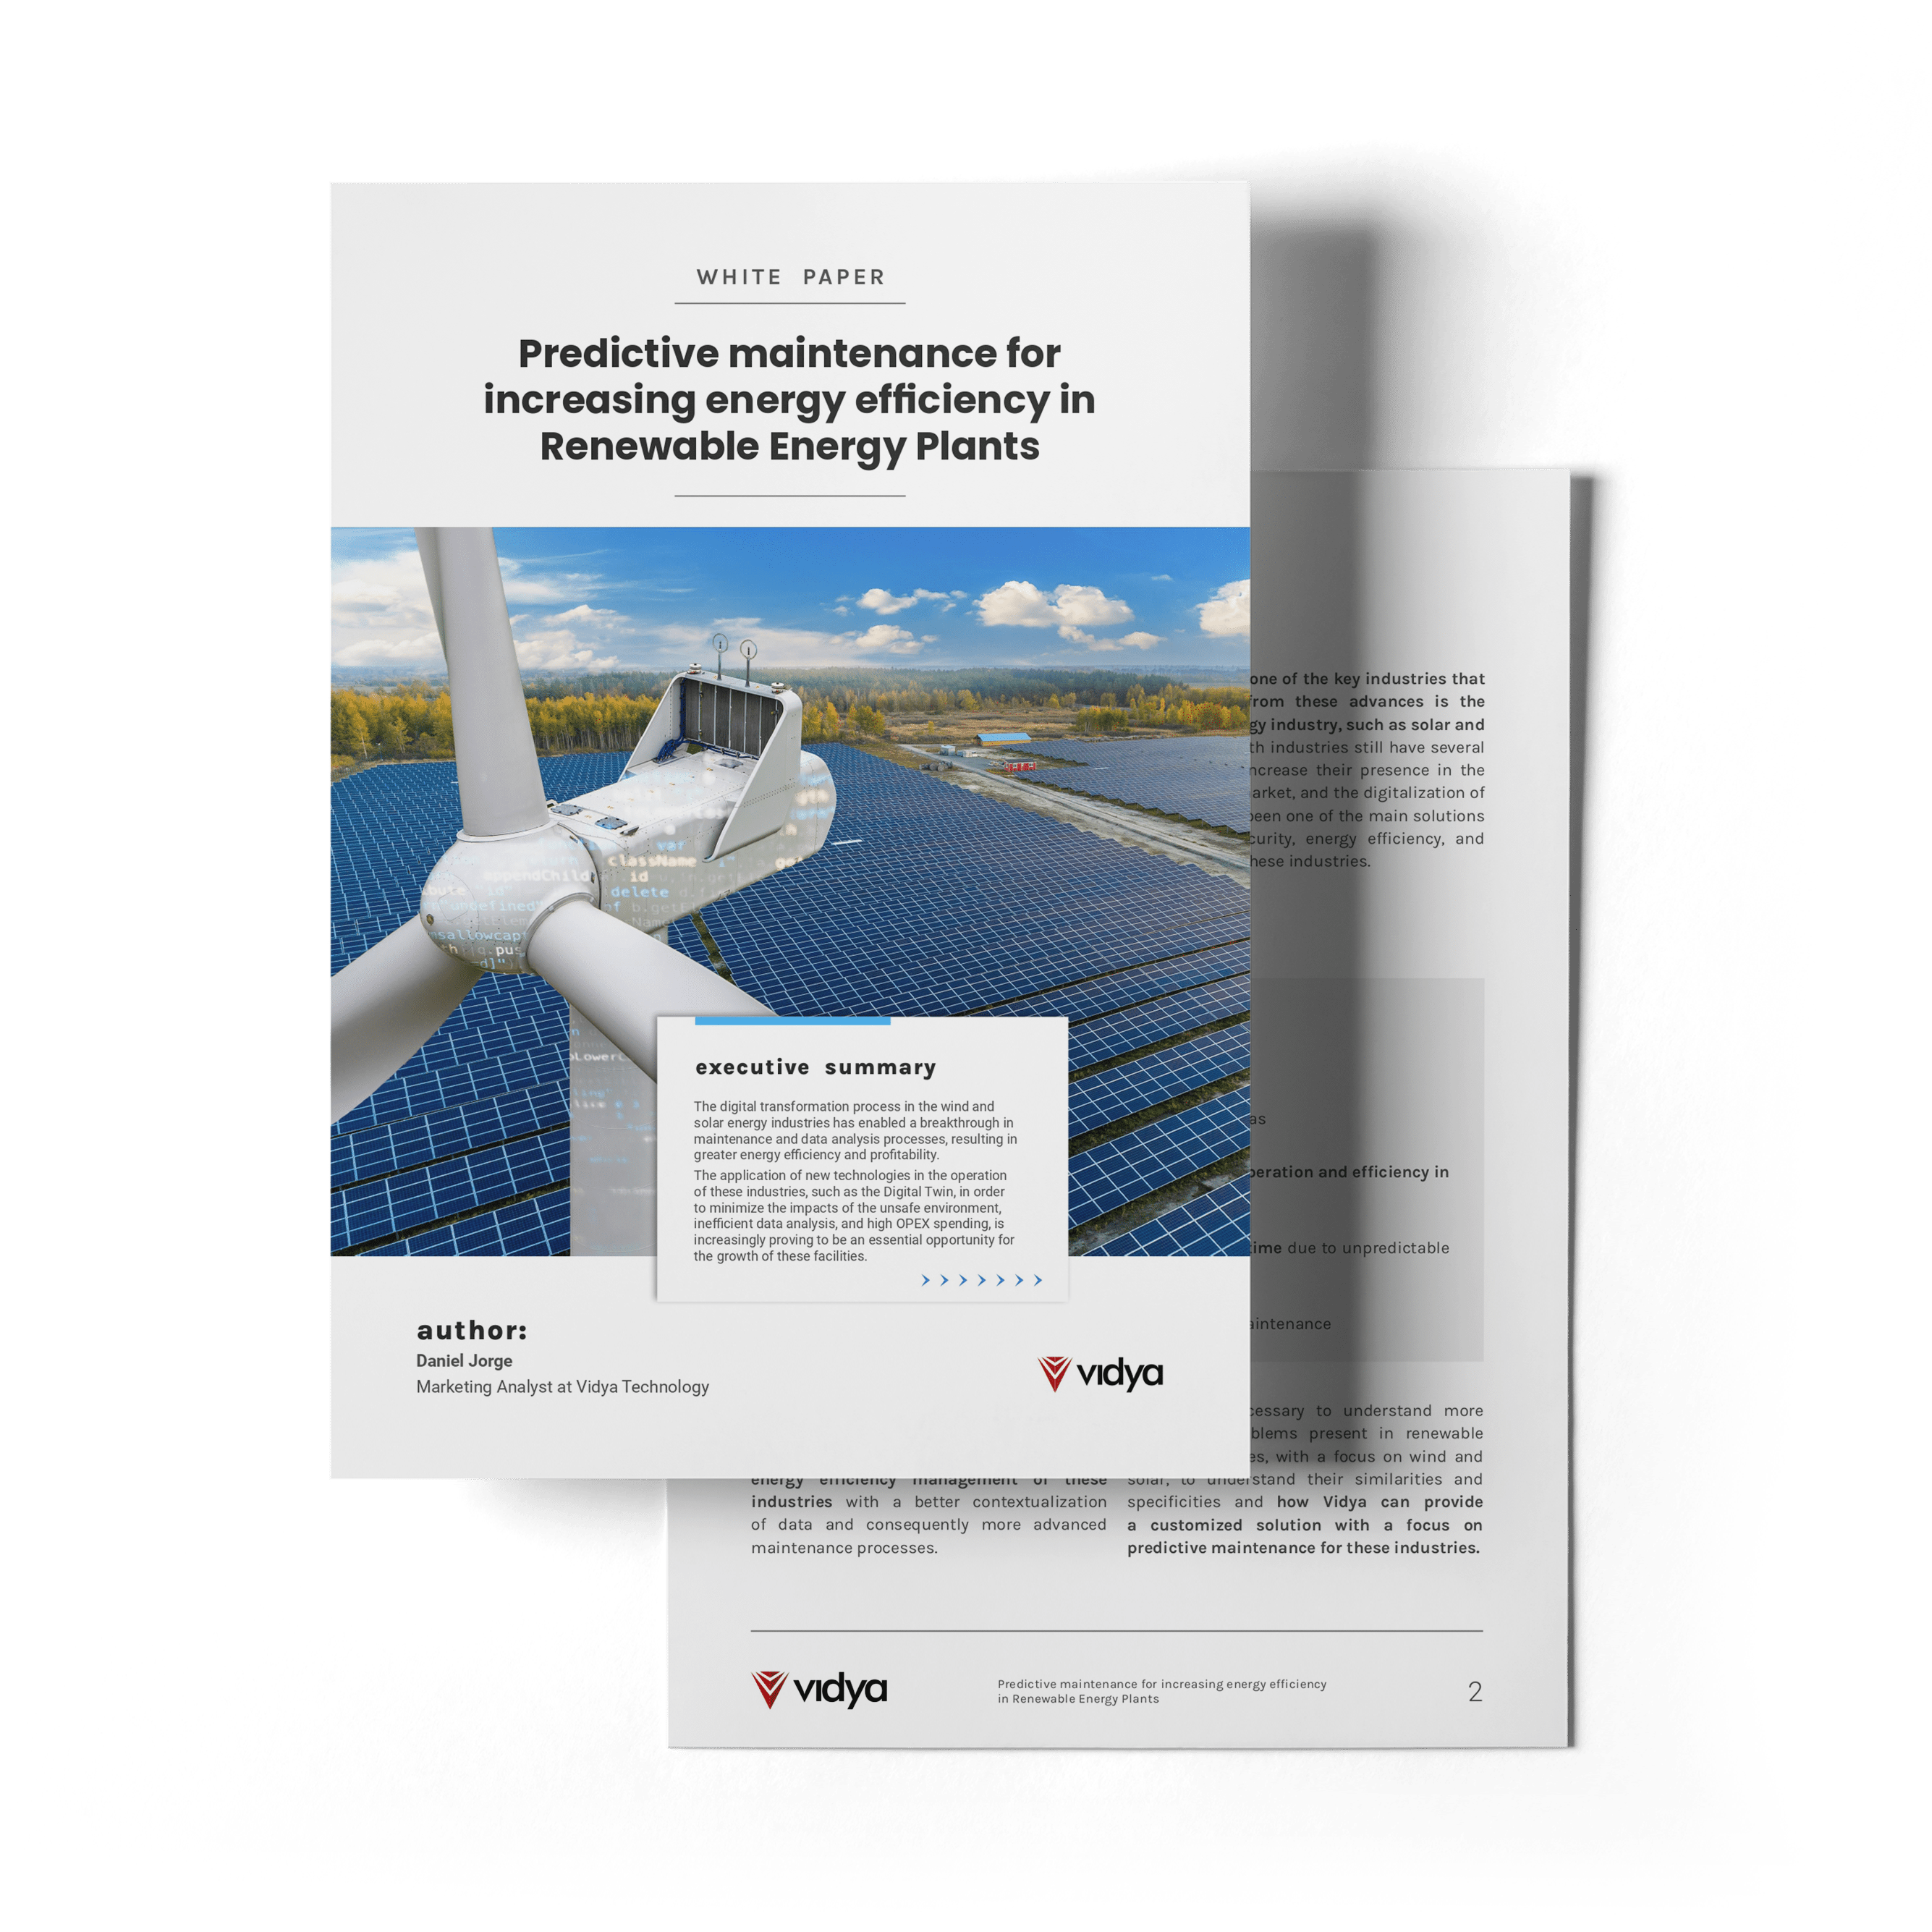 Thank you - White Paper - Predictive maintenance for increasing energy efficiency in Renewable Energy Plants